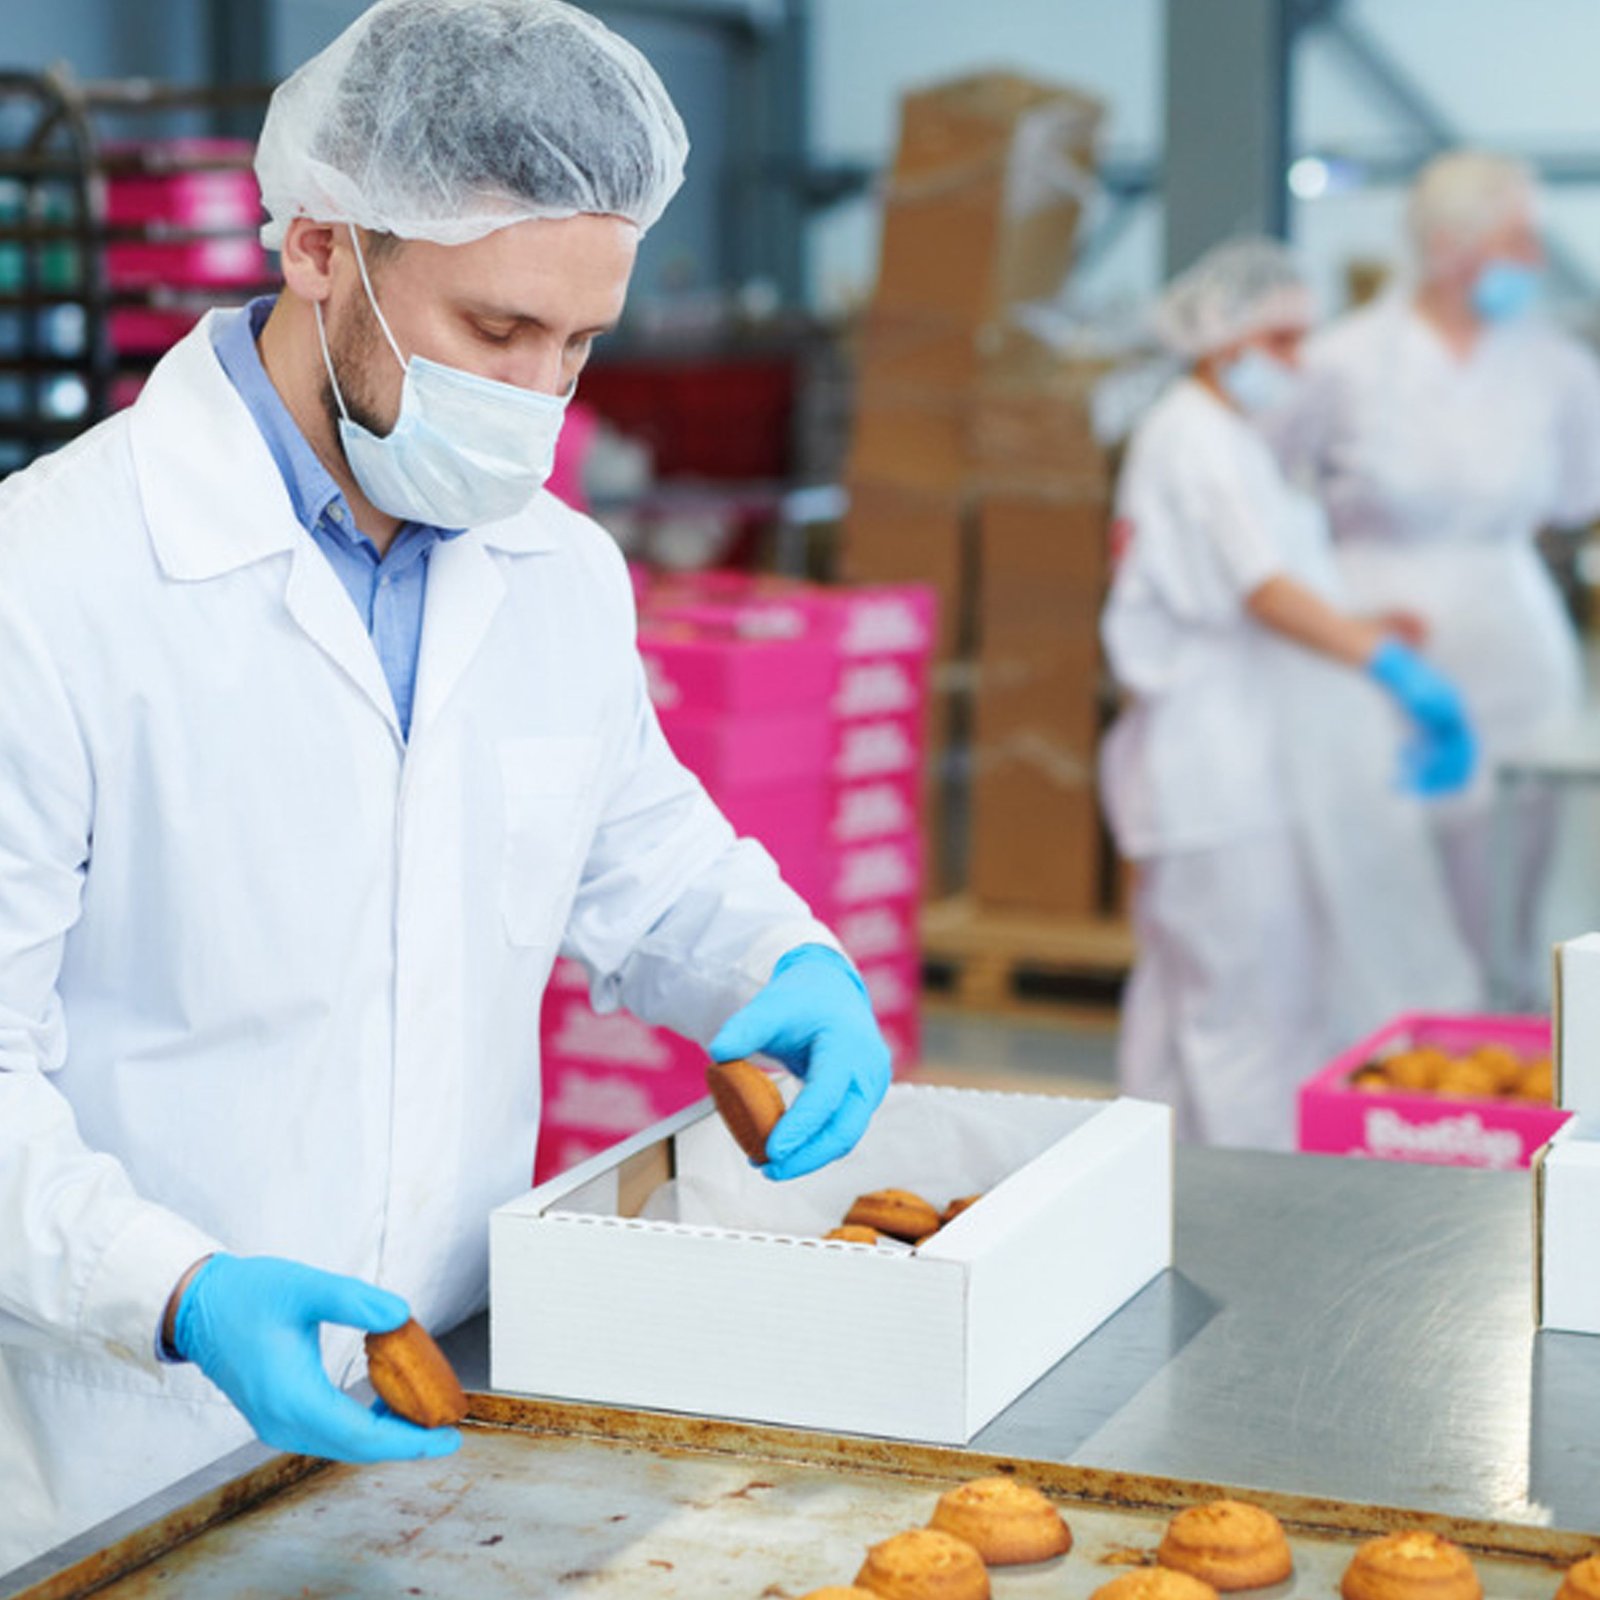 B.Voc. Food Processing and Nutraceuticals courses